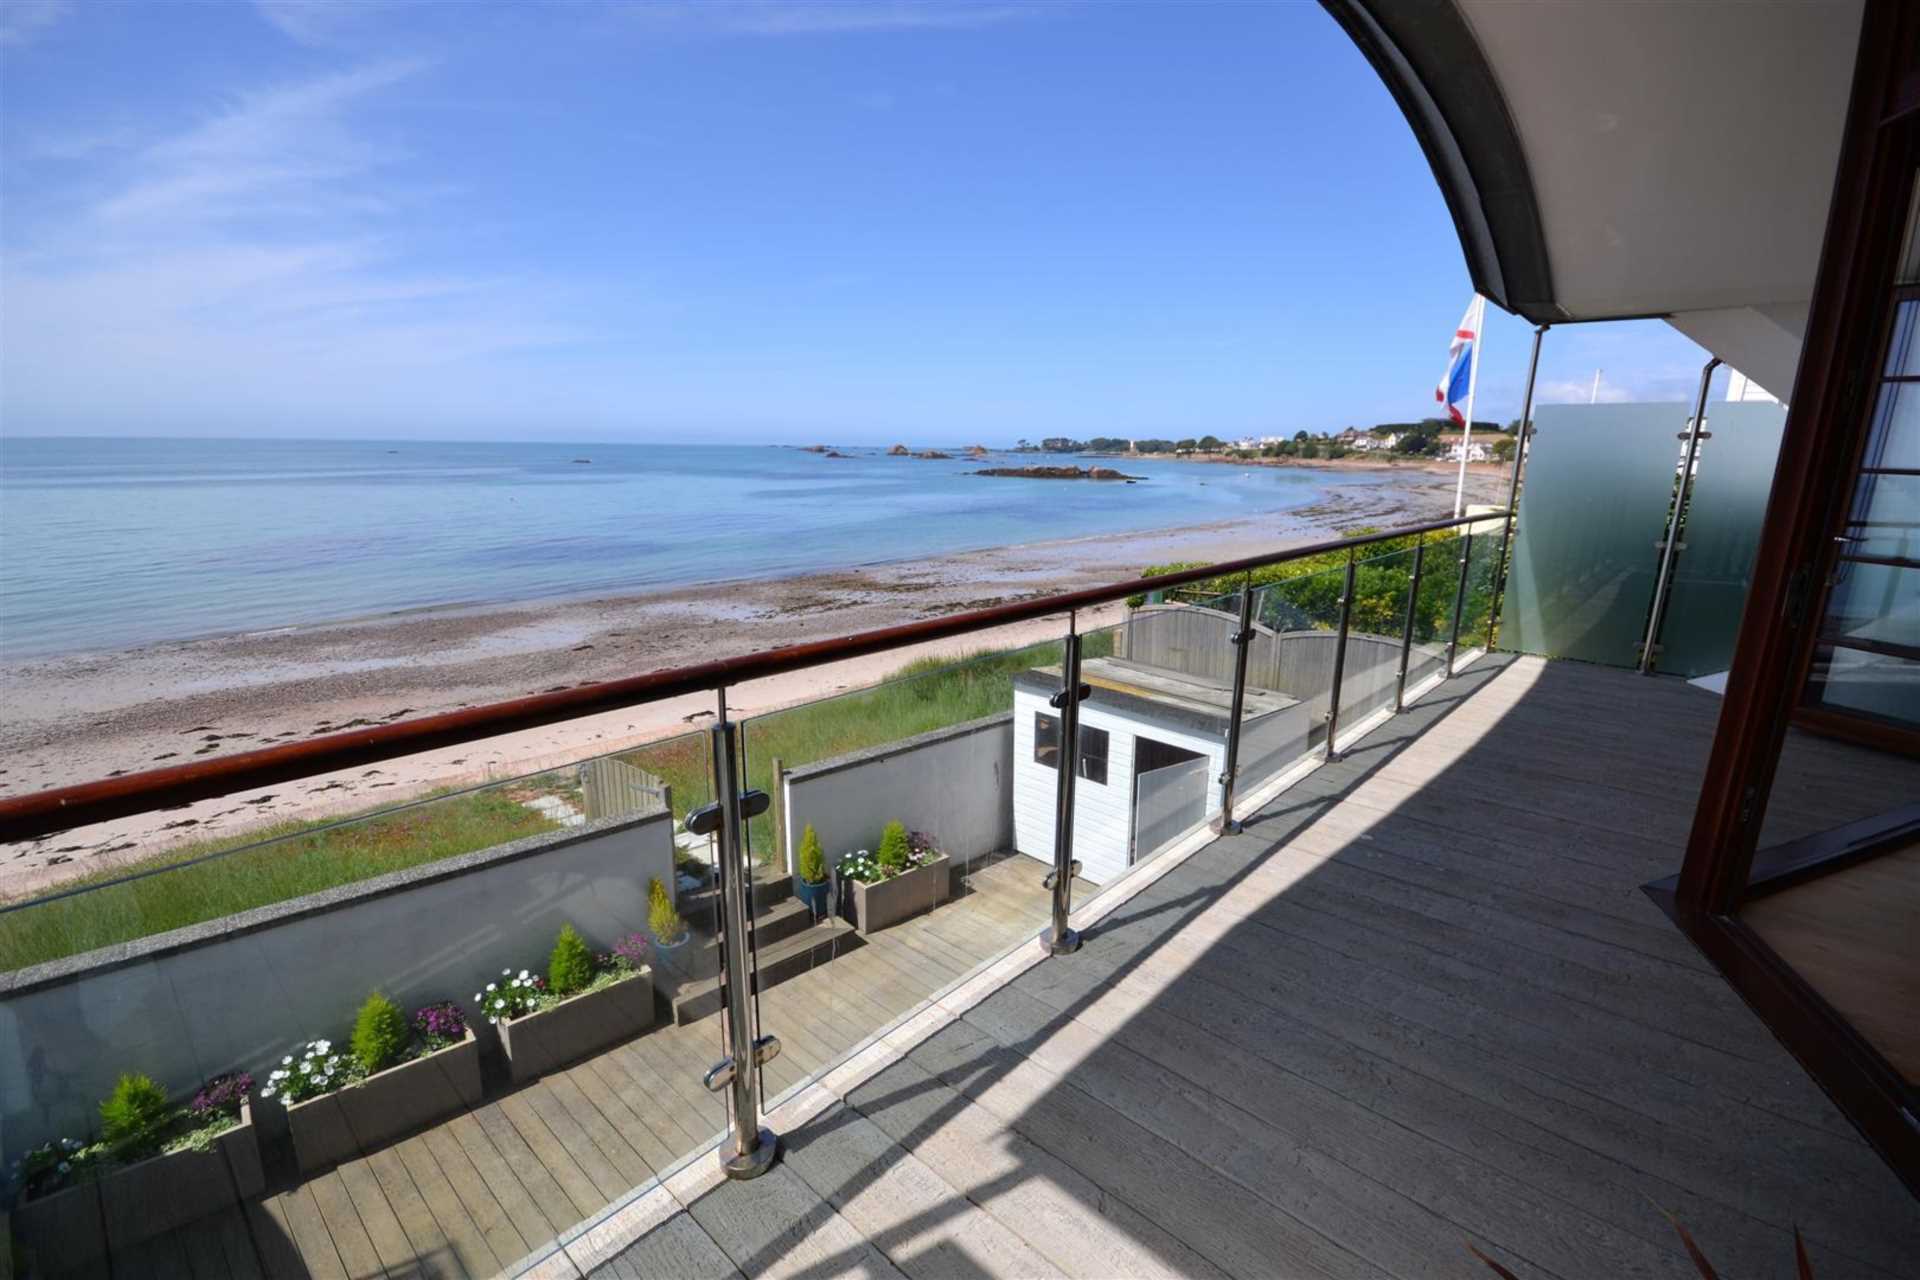 STUNNING 3 BEDROOM BEACH HOUSE TO RENT FROM JUNE JUST IN TIME FOR SUMMER ON THE BEACH, Image 10